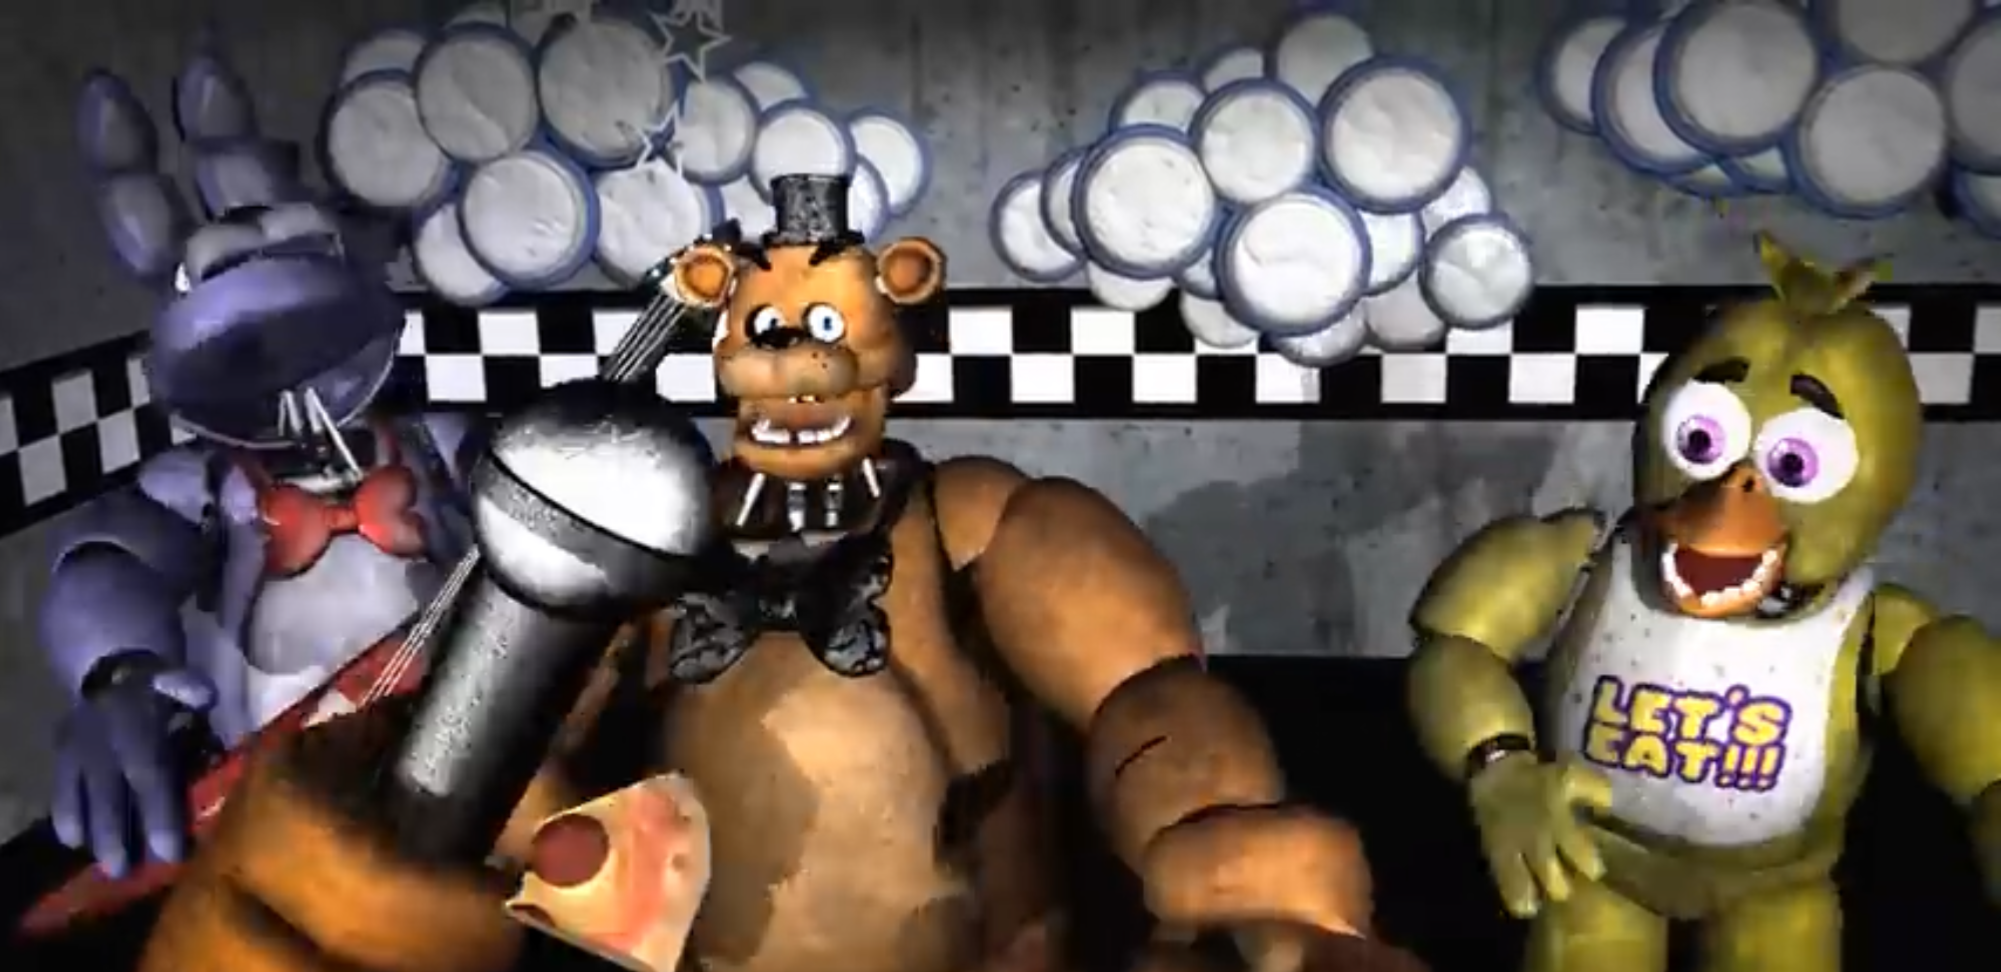 Me and the Bois FNAF edition Blank Meme Template